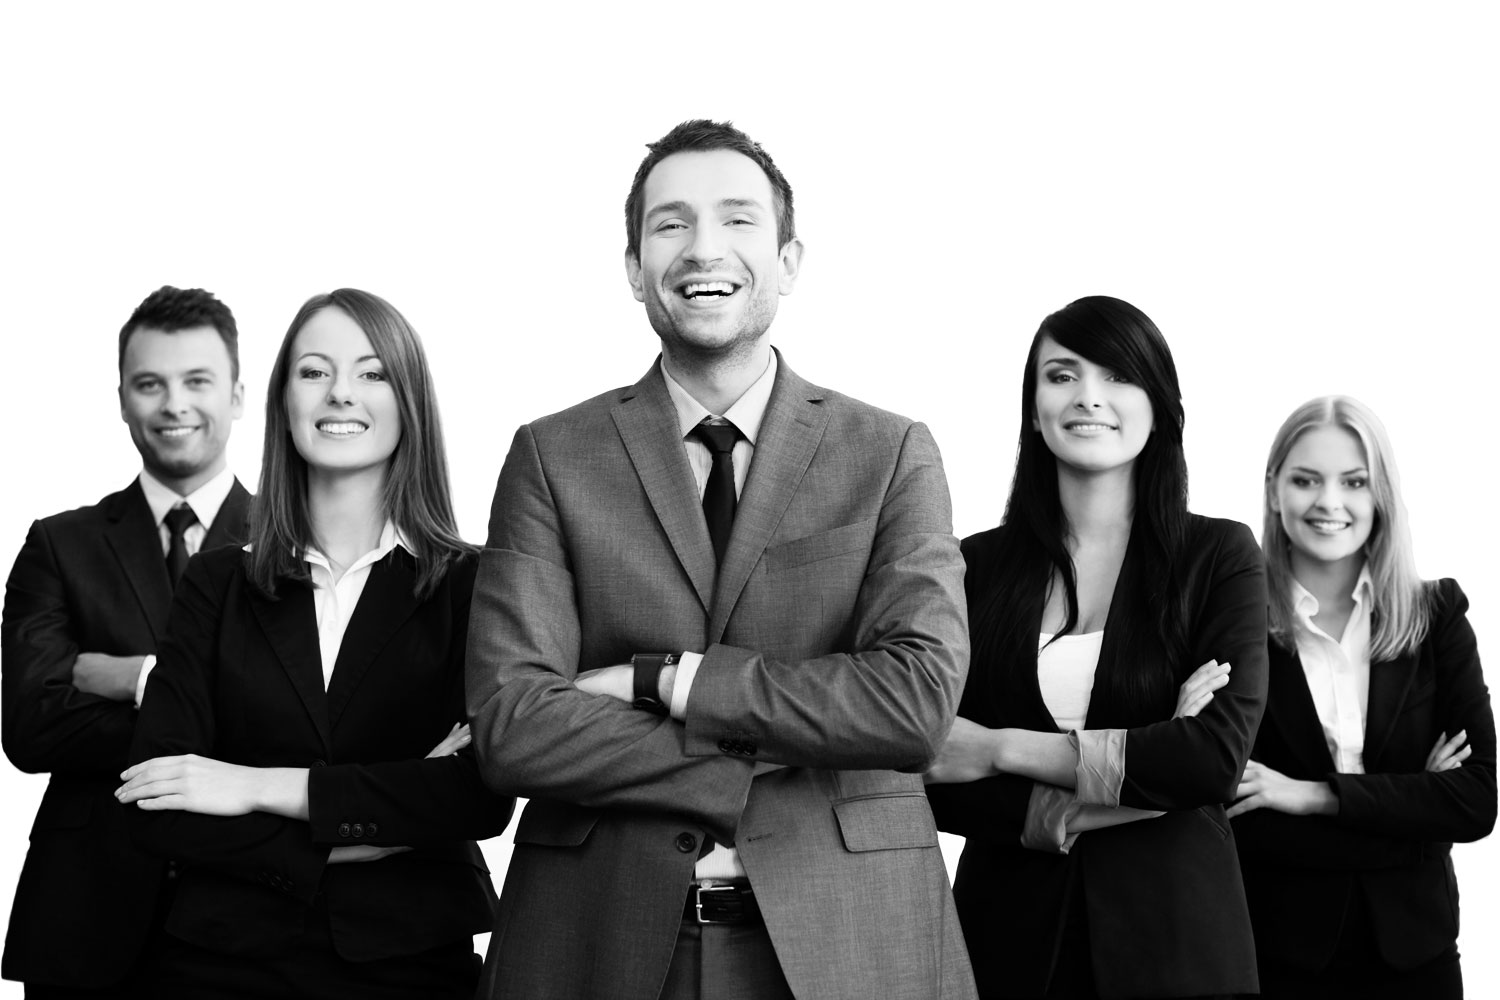 Meet your client's exact permanent staffing requirements